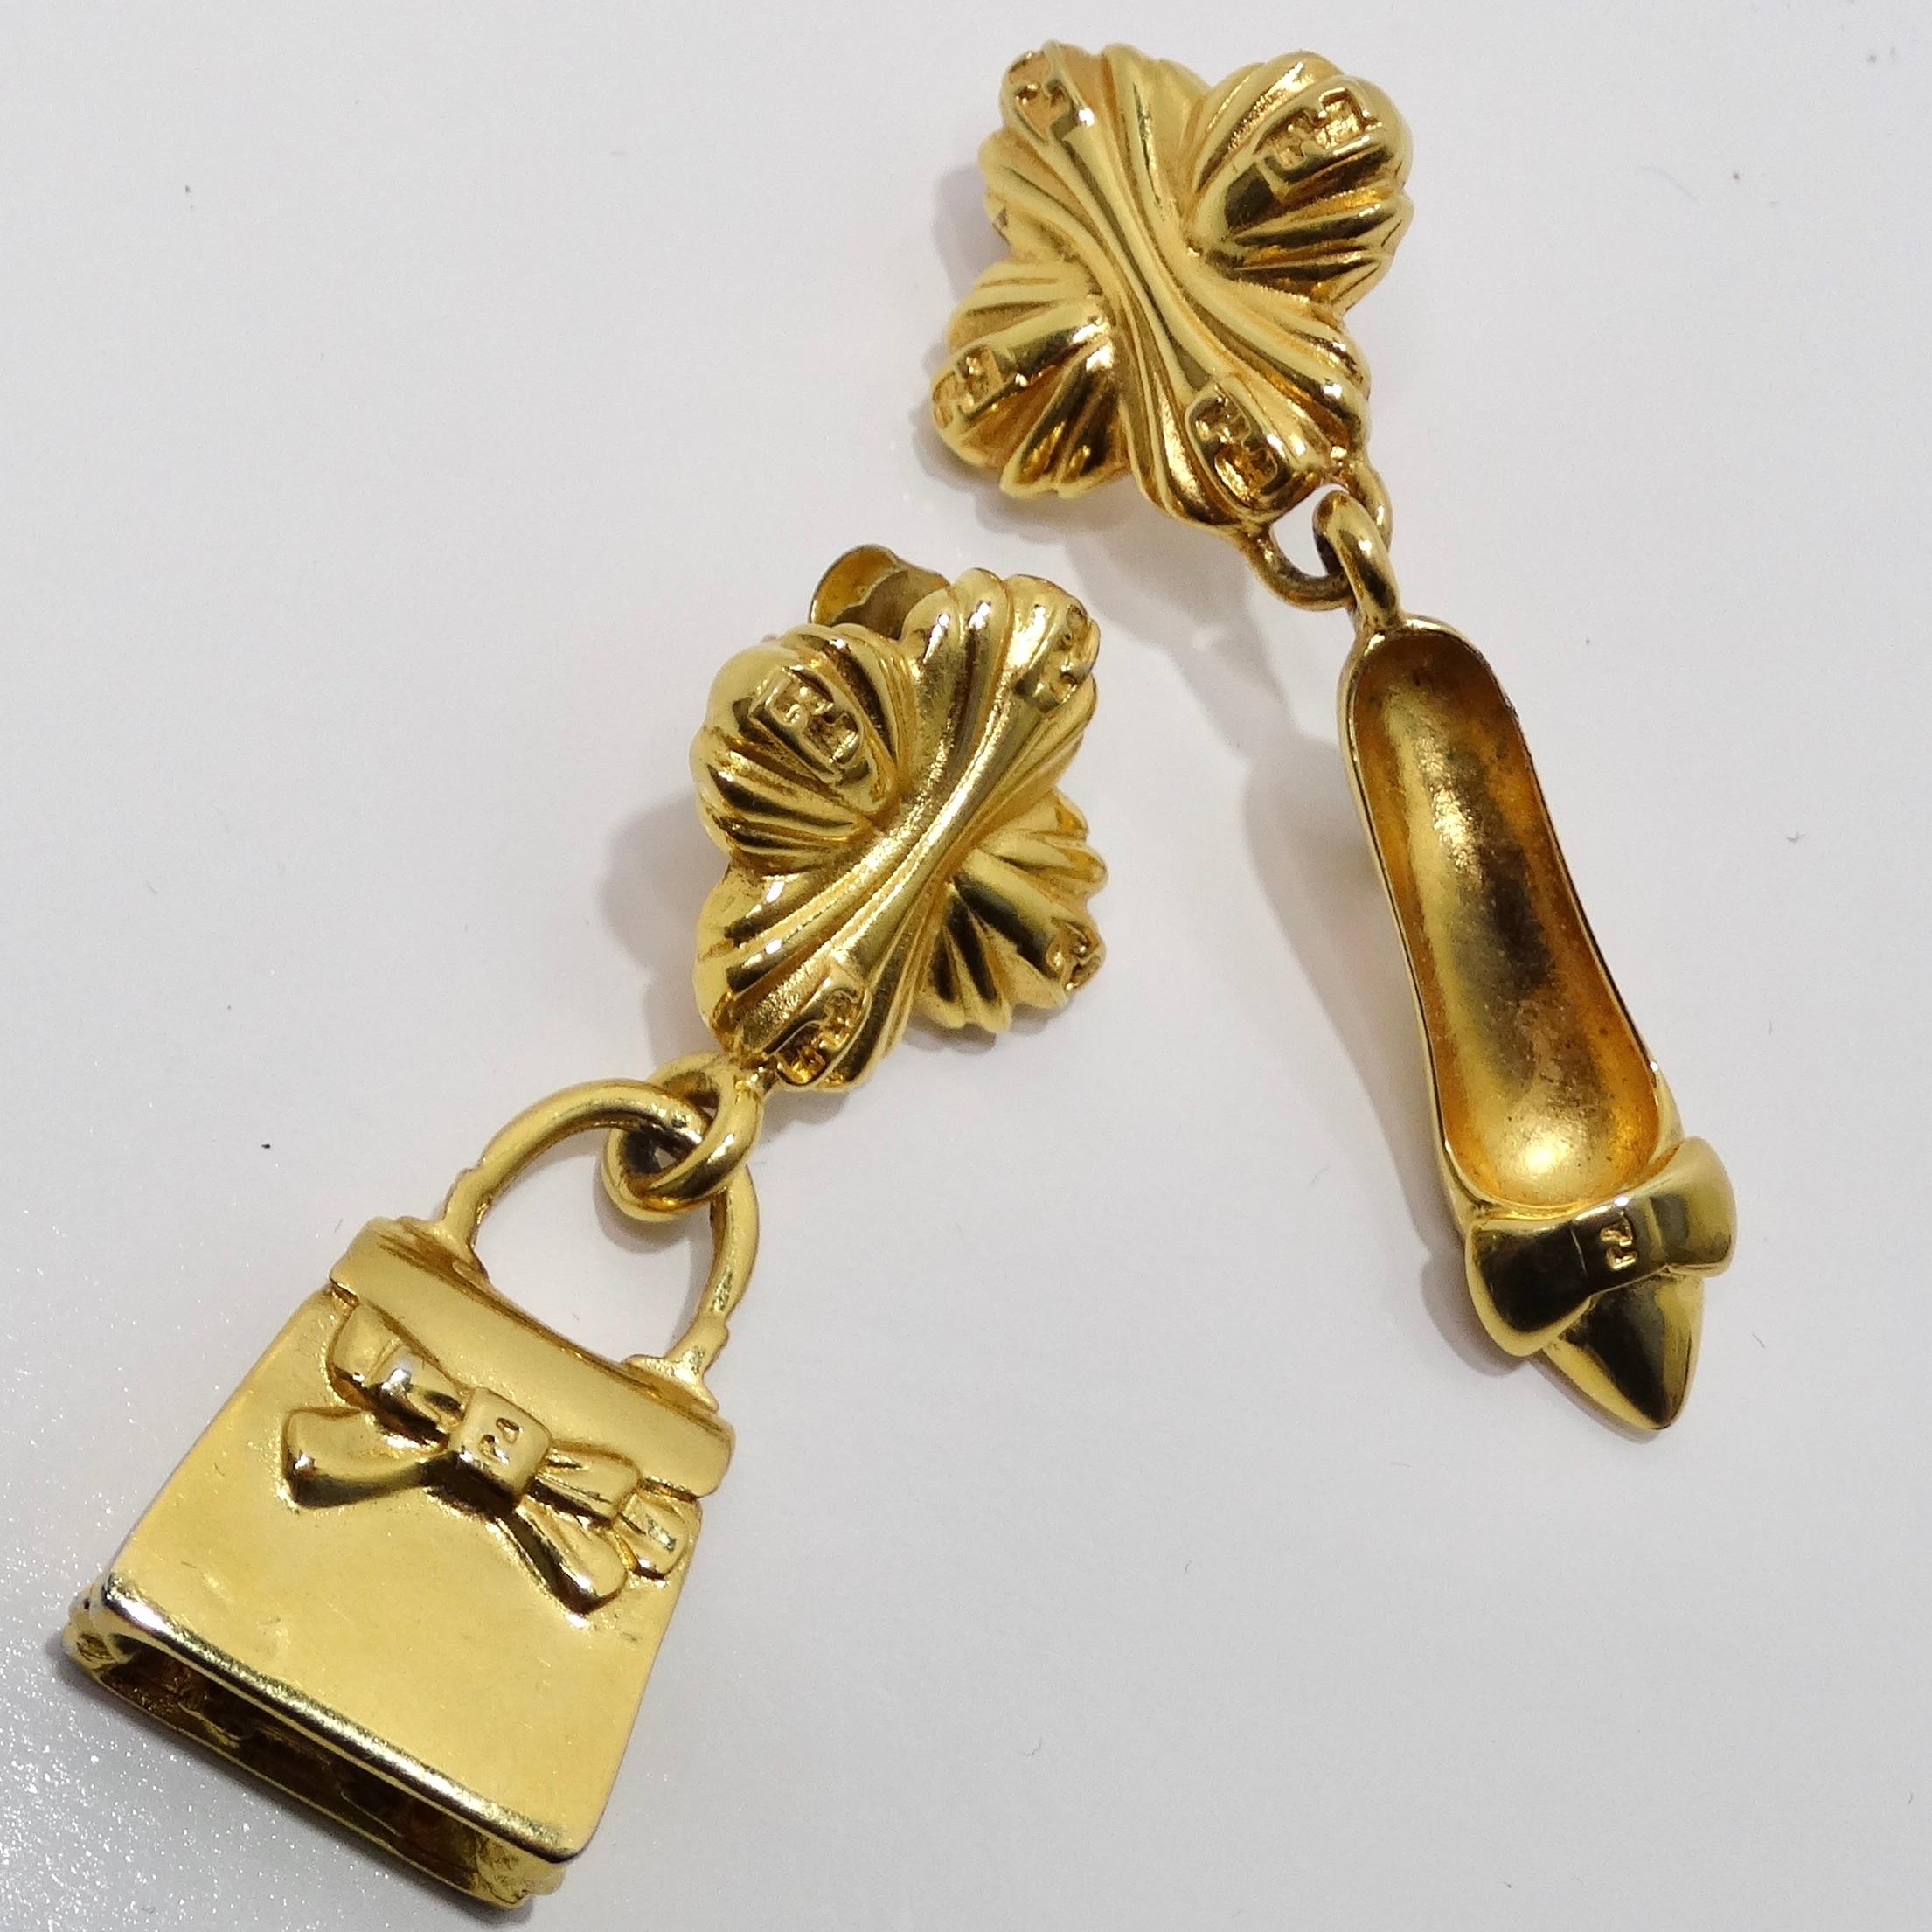 Introducing the Fendi 1980s Gold Tone Purse High Heel Earrings, a playful and stylish accessory that captures the essence of Fendi's iconic designs. These super fun dangle earrings feature a unique asymmetric look, adding an element of whimsy and